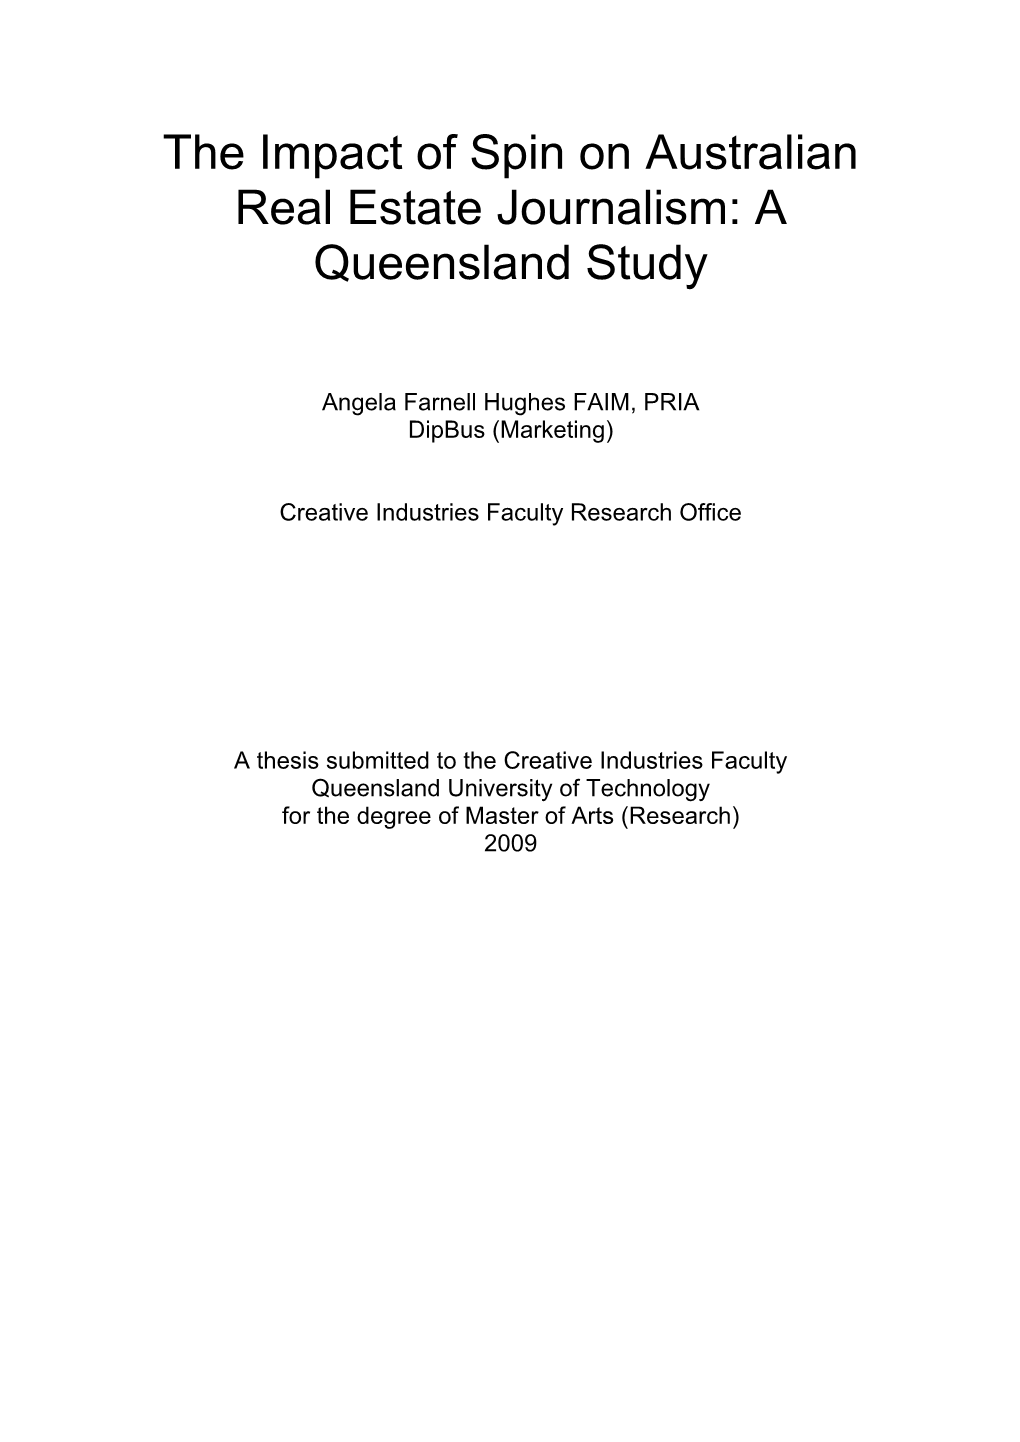 The Impact of Spin on Australian Real Estate Journalism: a Queensland Study